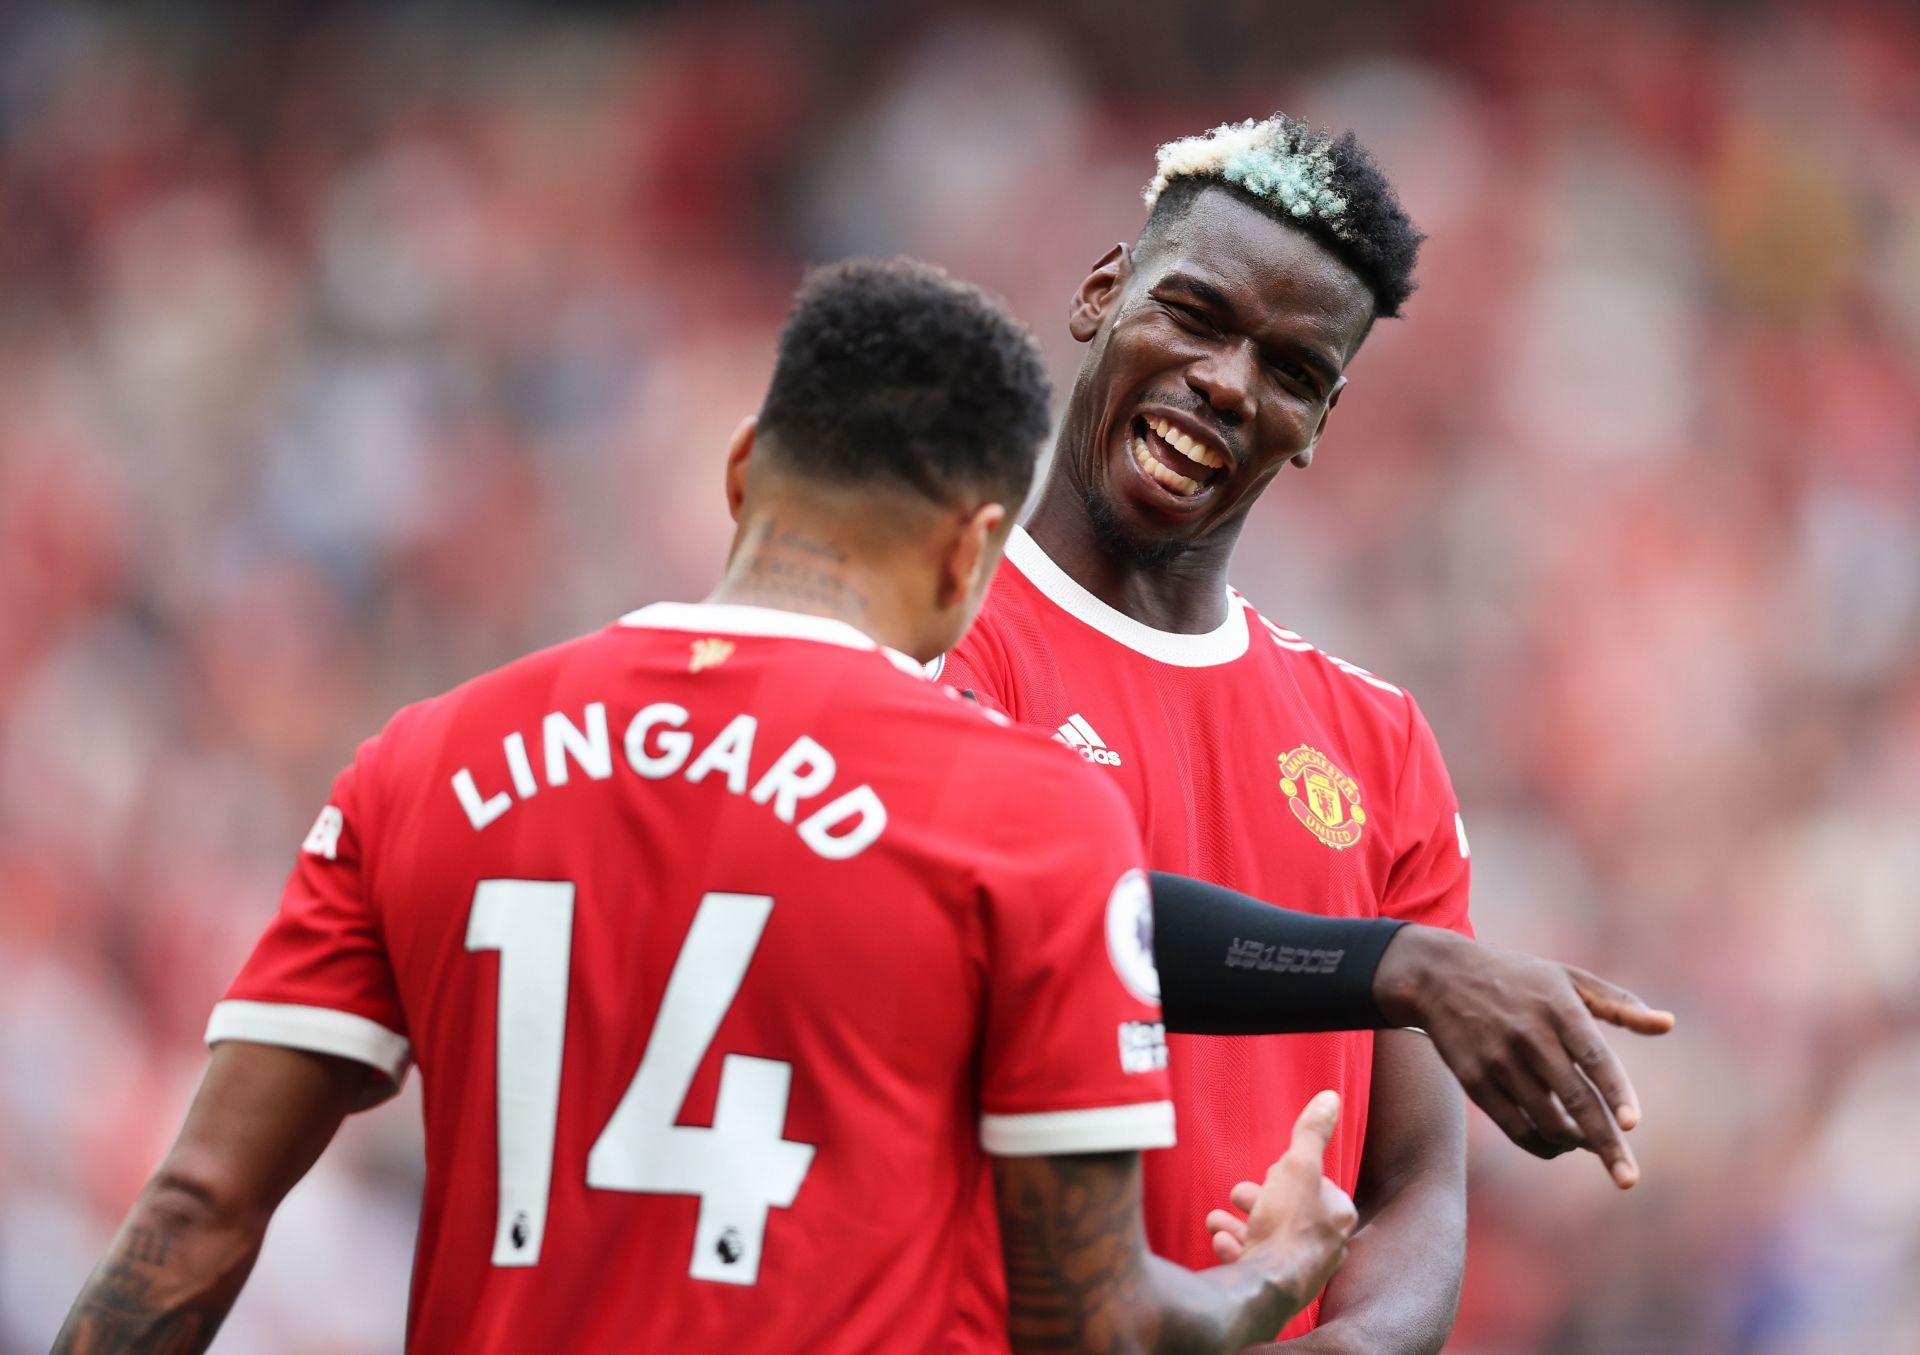 Lingard and Pogba could both depart Old Trafford